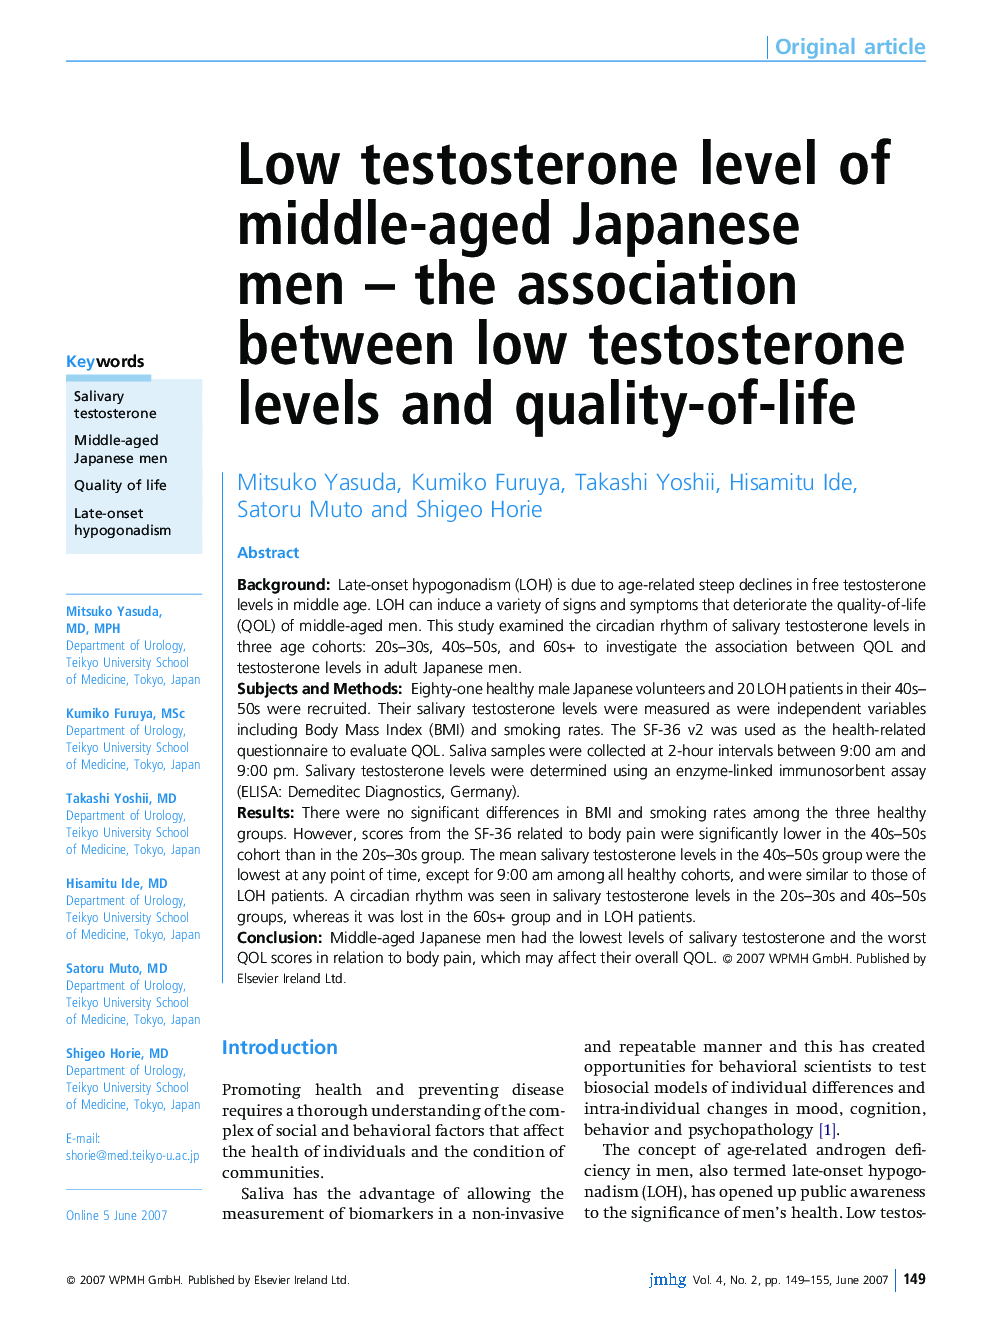 Low testosterone level of middle-aged Japanese men - the association between low testosterone levels and quality-of-life